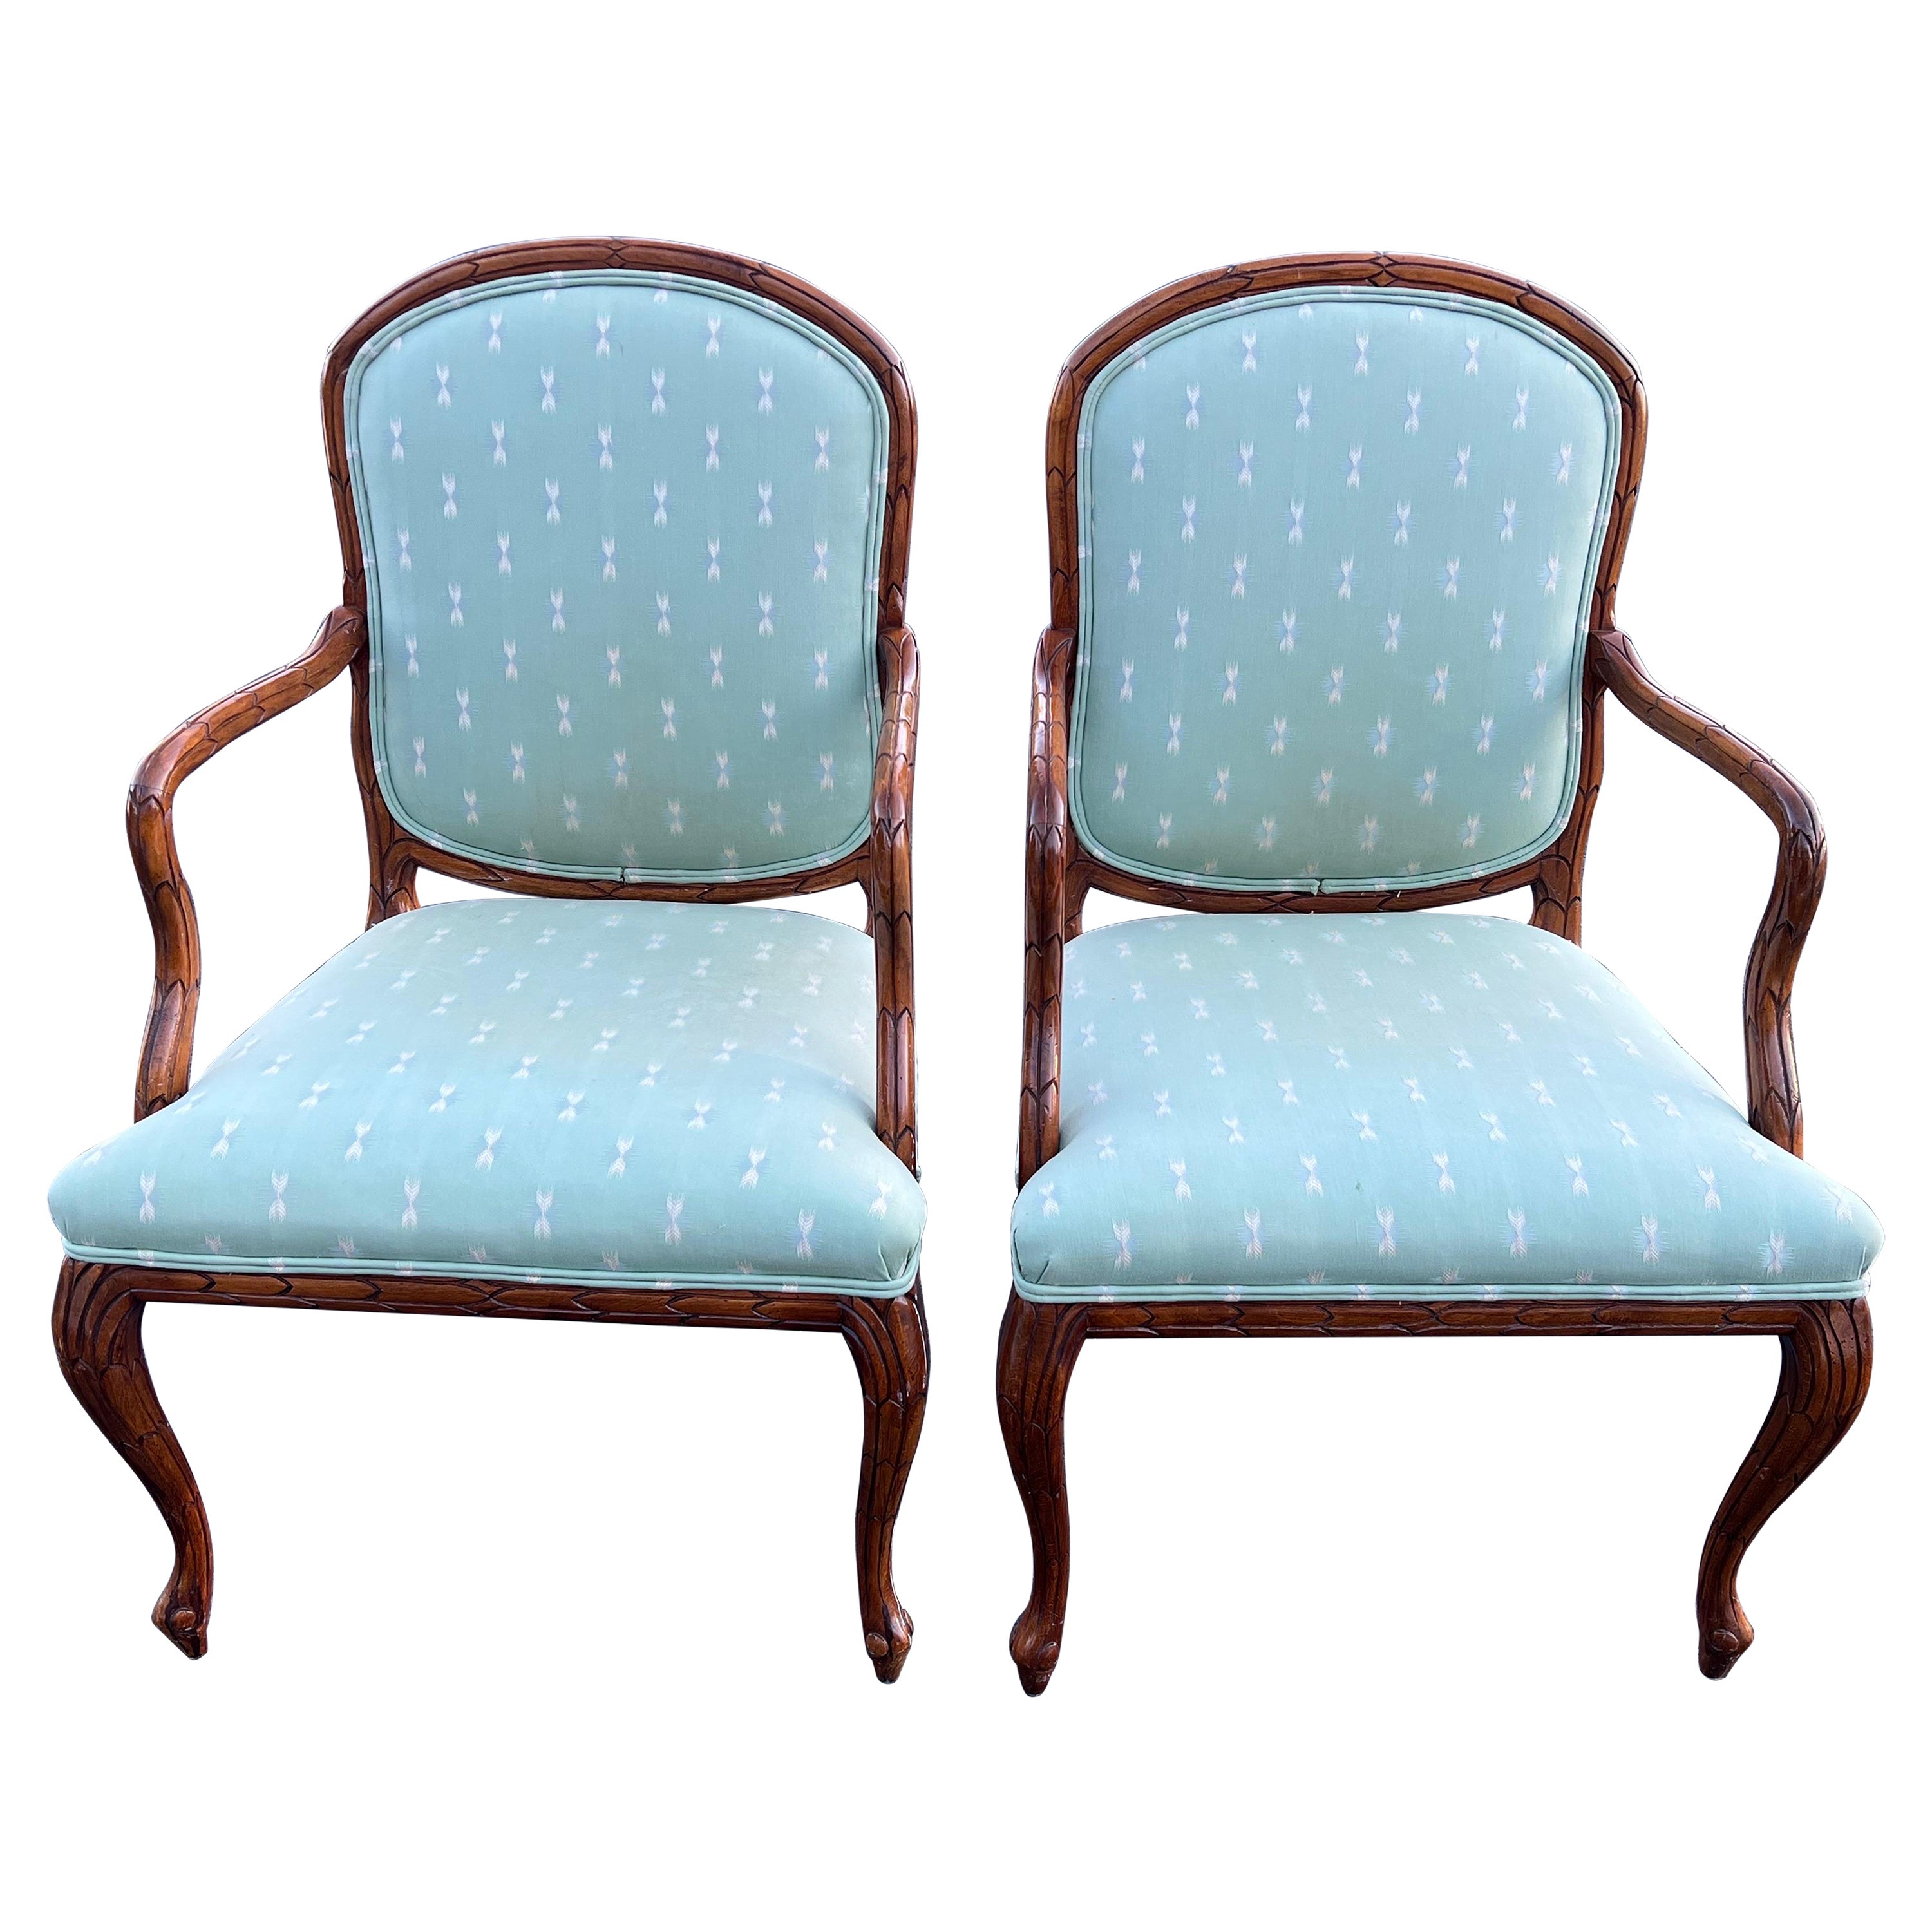 Pair of Faux Bois Bergères in the style of Serge Roche